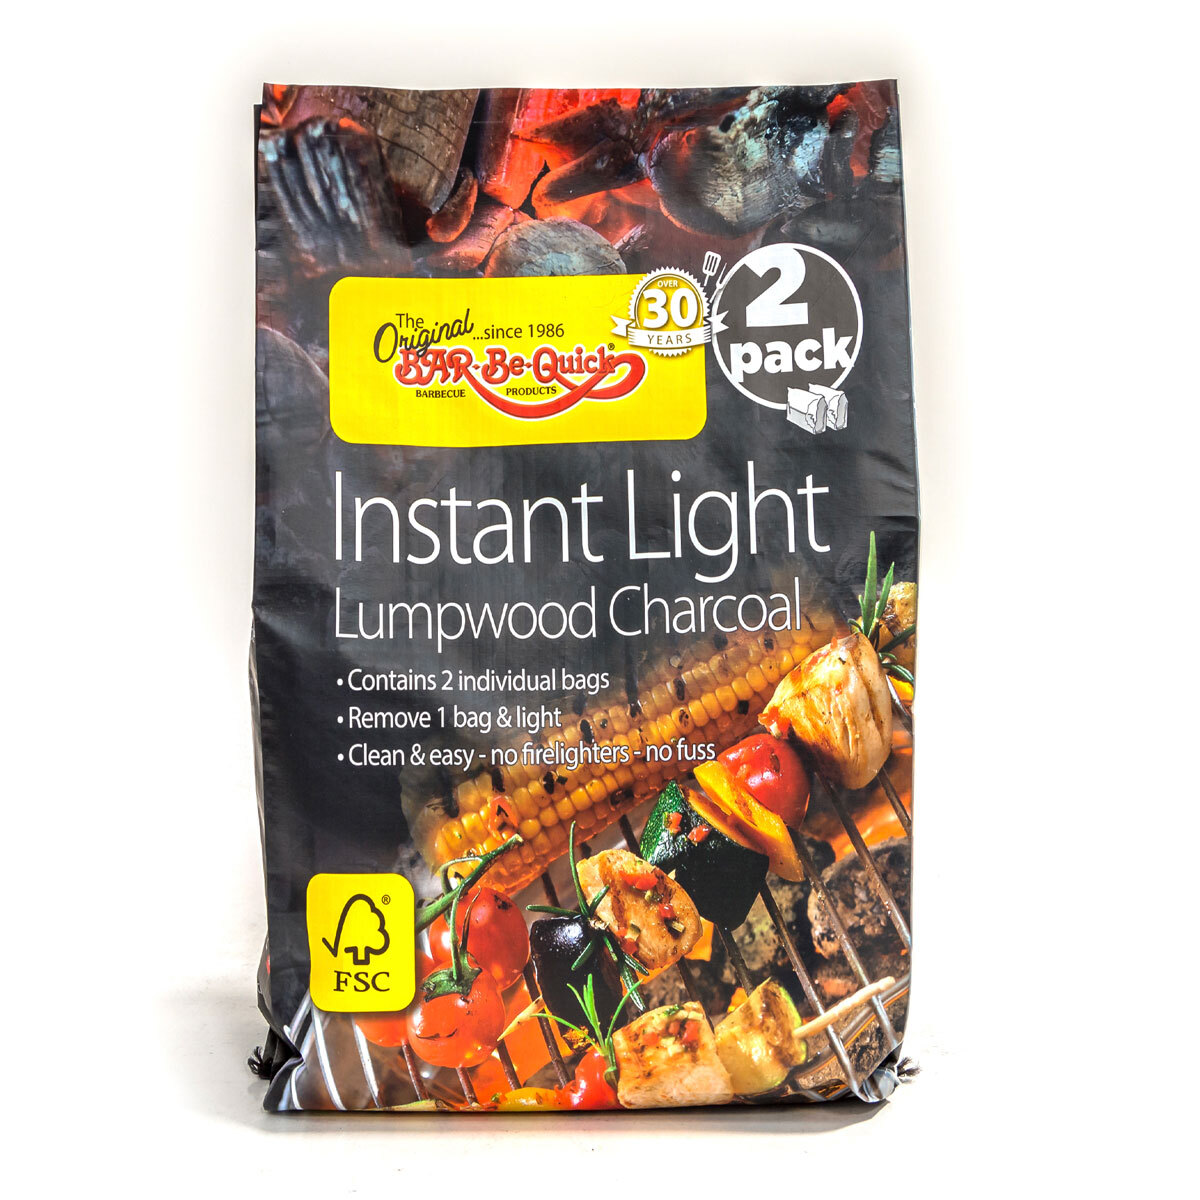 Perfect for Picnic BBQs Simply light 16 X Bar-Be-Quick Instant Light Grab & Grill Bags- Lumpwood Charcoal- 500g each bag and cook! Kettle BBQs Firepits and much more